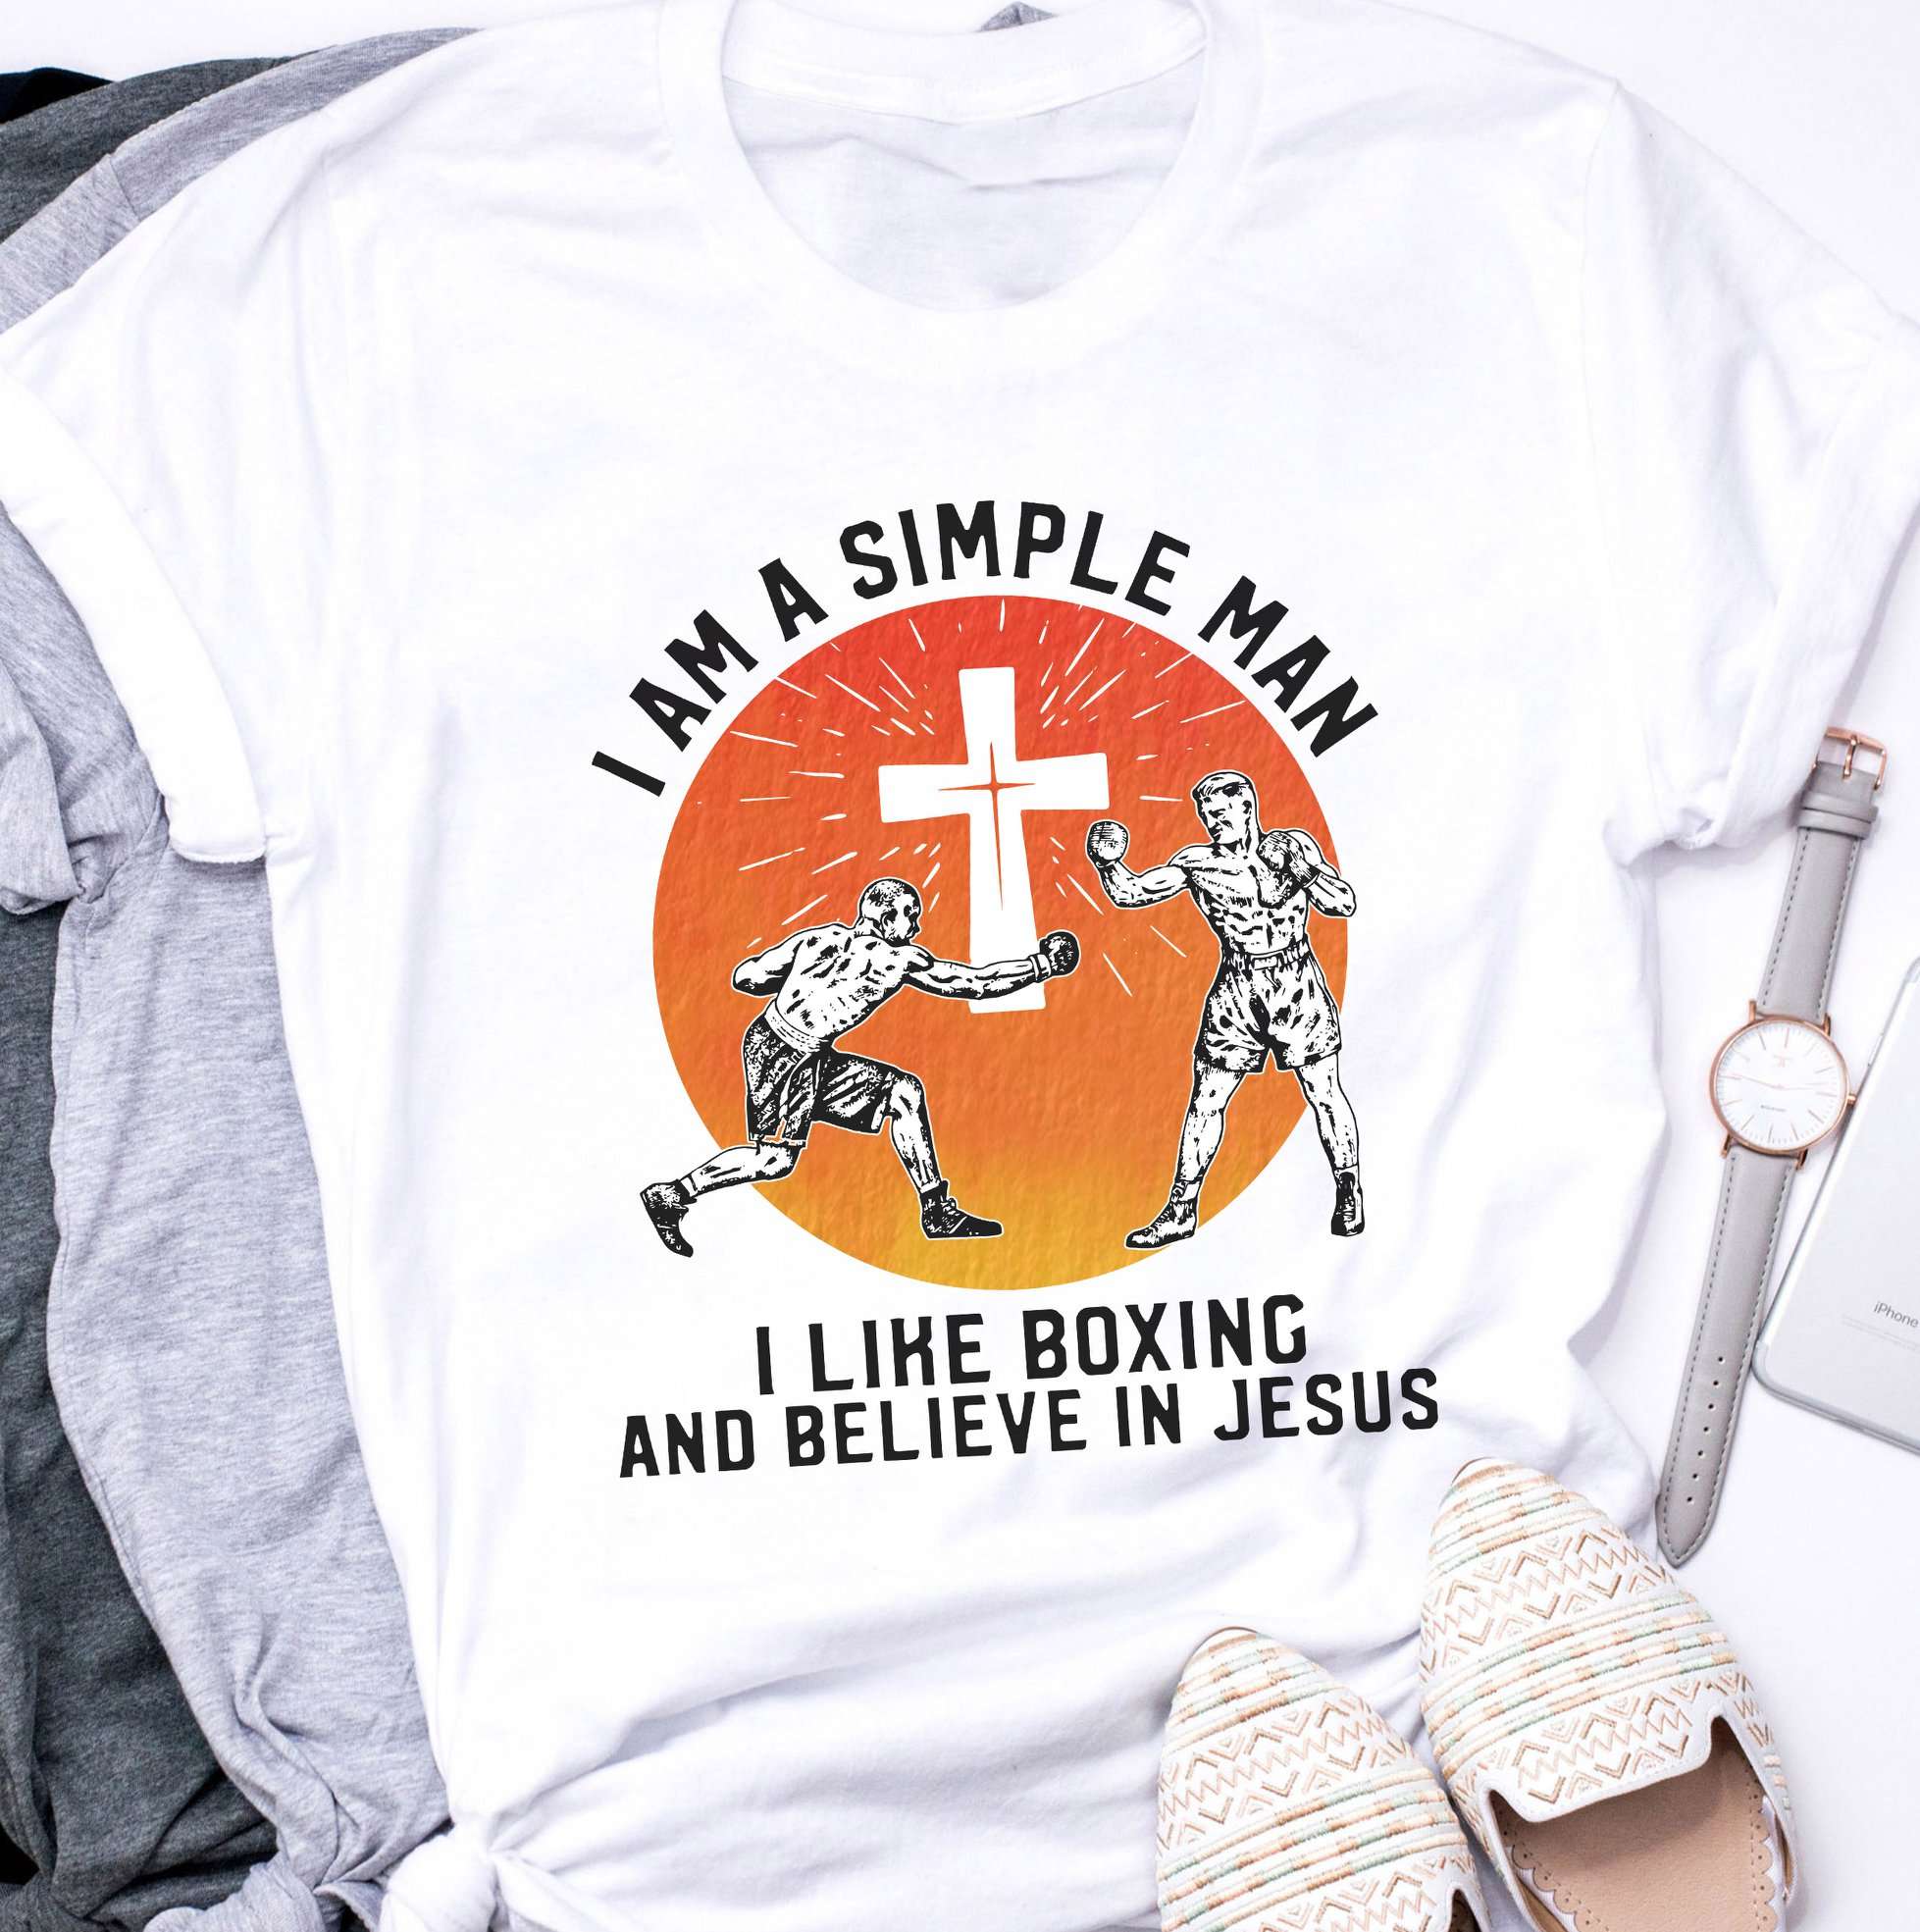 I am a simple man I like boxing and believe in Jesus - Jesus the god, boxing training